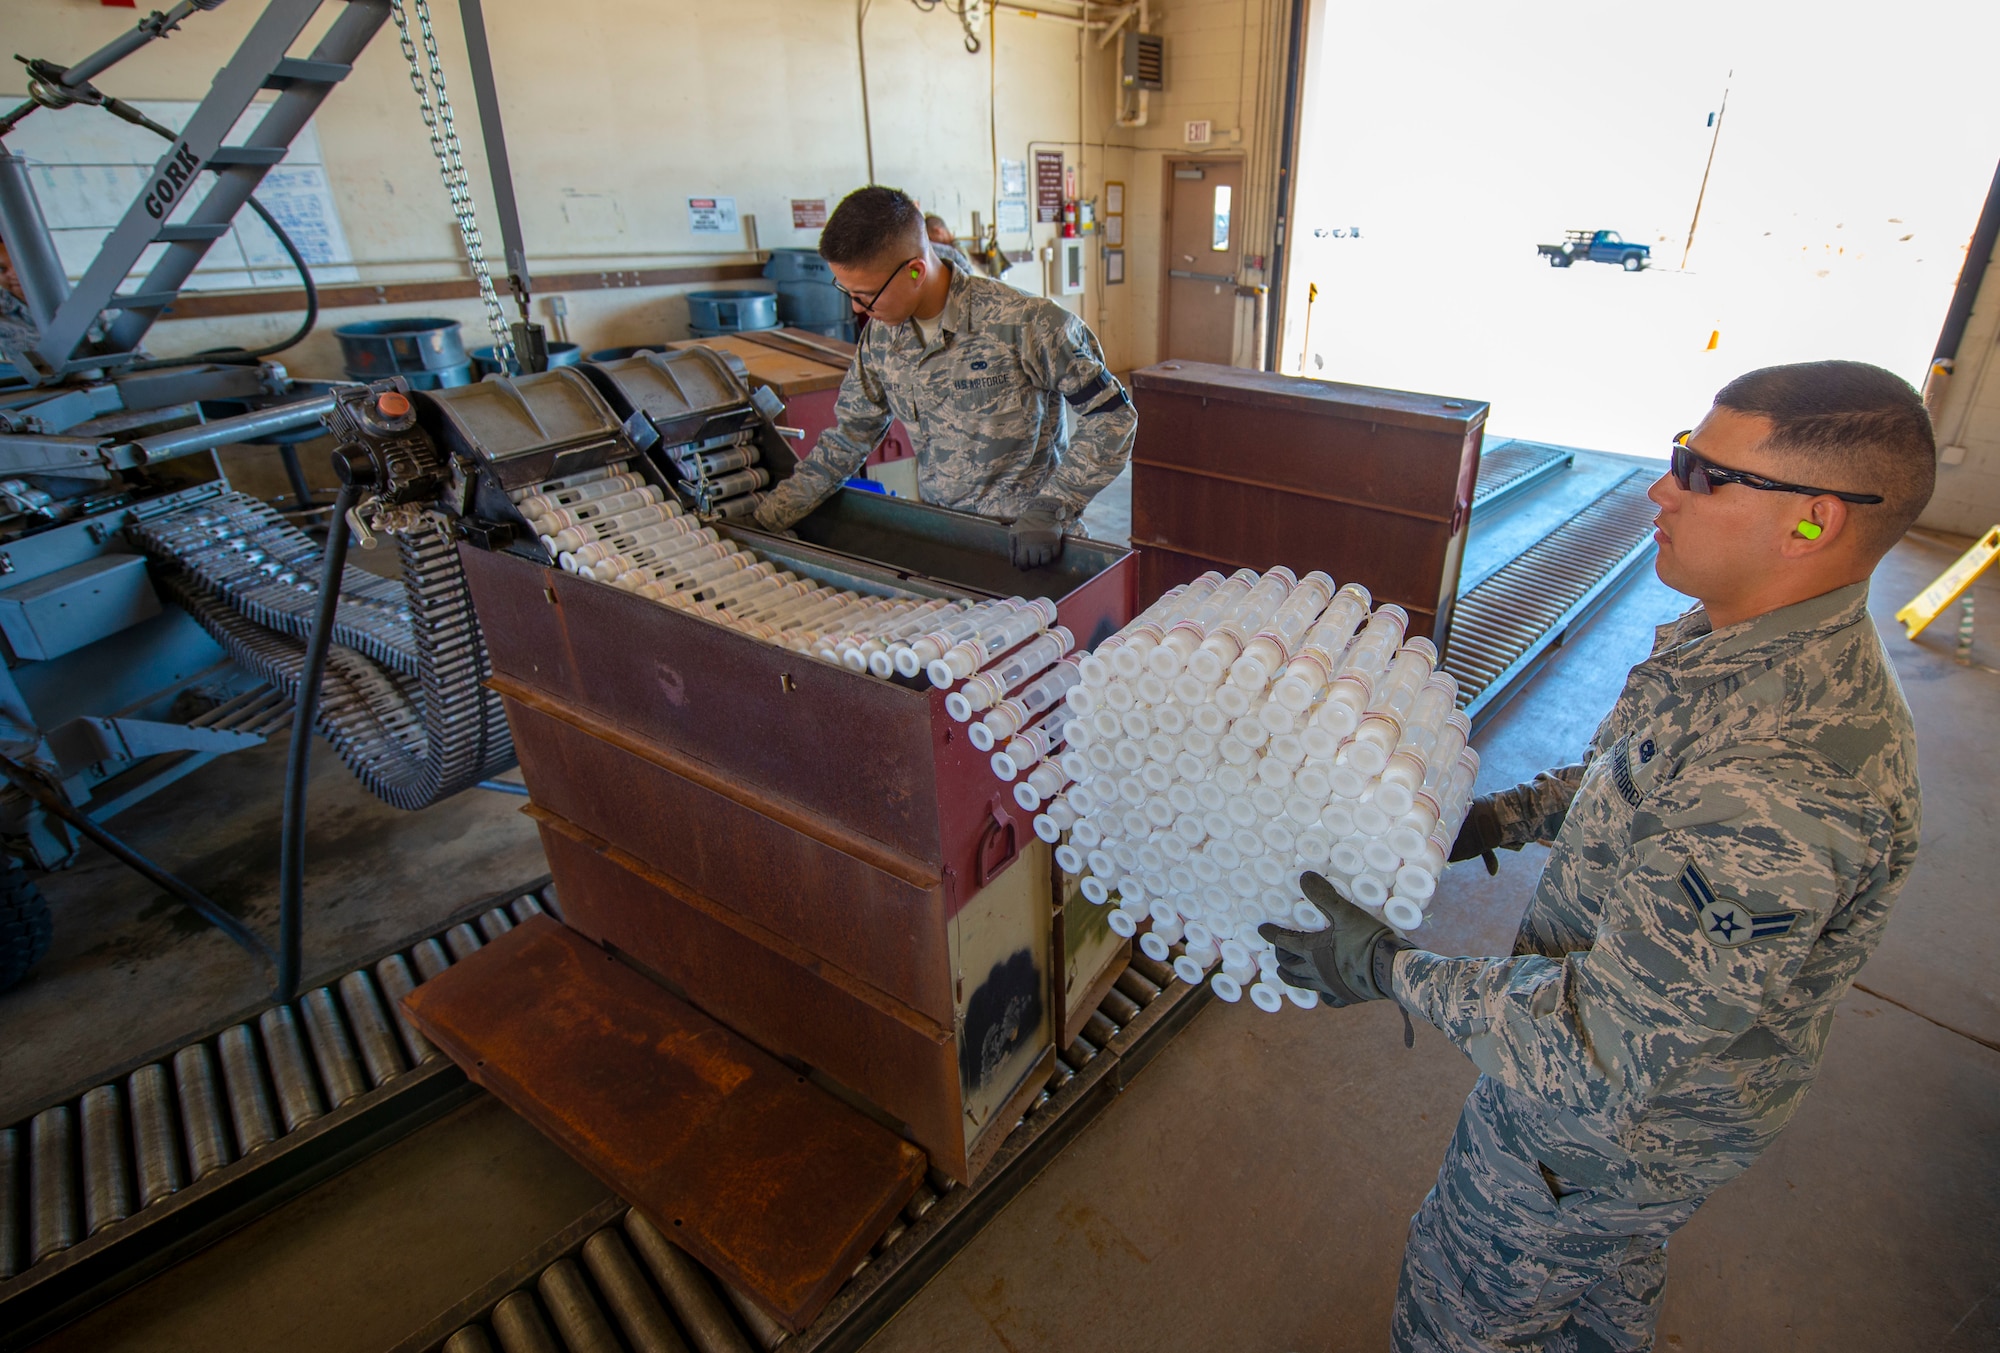 U.S. Air Force Airman 1st Class Stephen Luna, 57th Munitions Squadron (MUNS) small bombs crew member, wraps empty 30mm round holders at Nellis Air Force Base, Nev., June 4, 2019. Luna works in the small bombs section of MUNS where he processes and accounts for all small ammunition used and unused. (U.S. Air Force photo by Staff Sgt. Tabatha McCarthy)